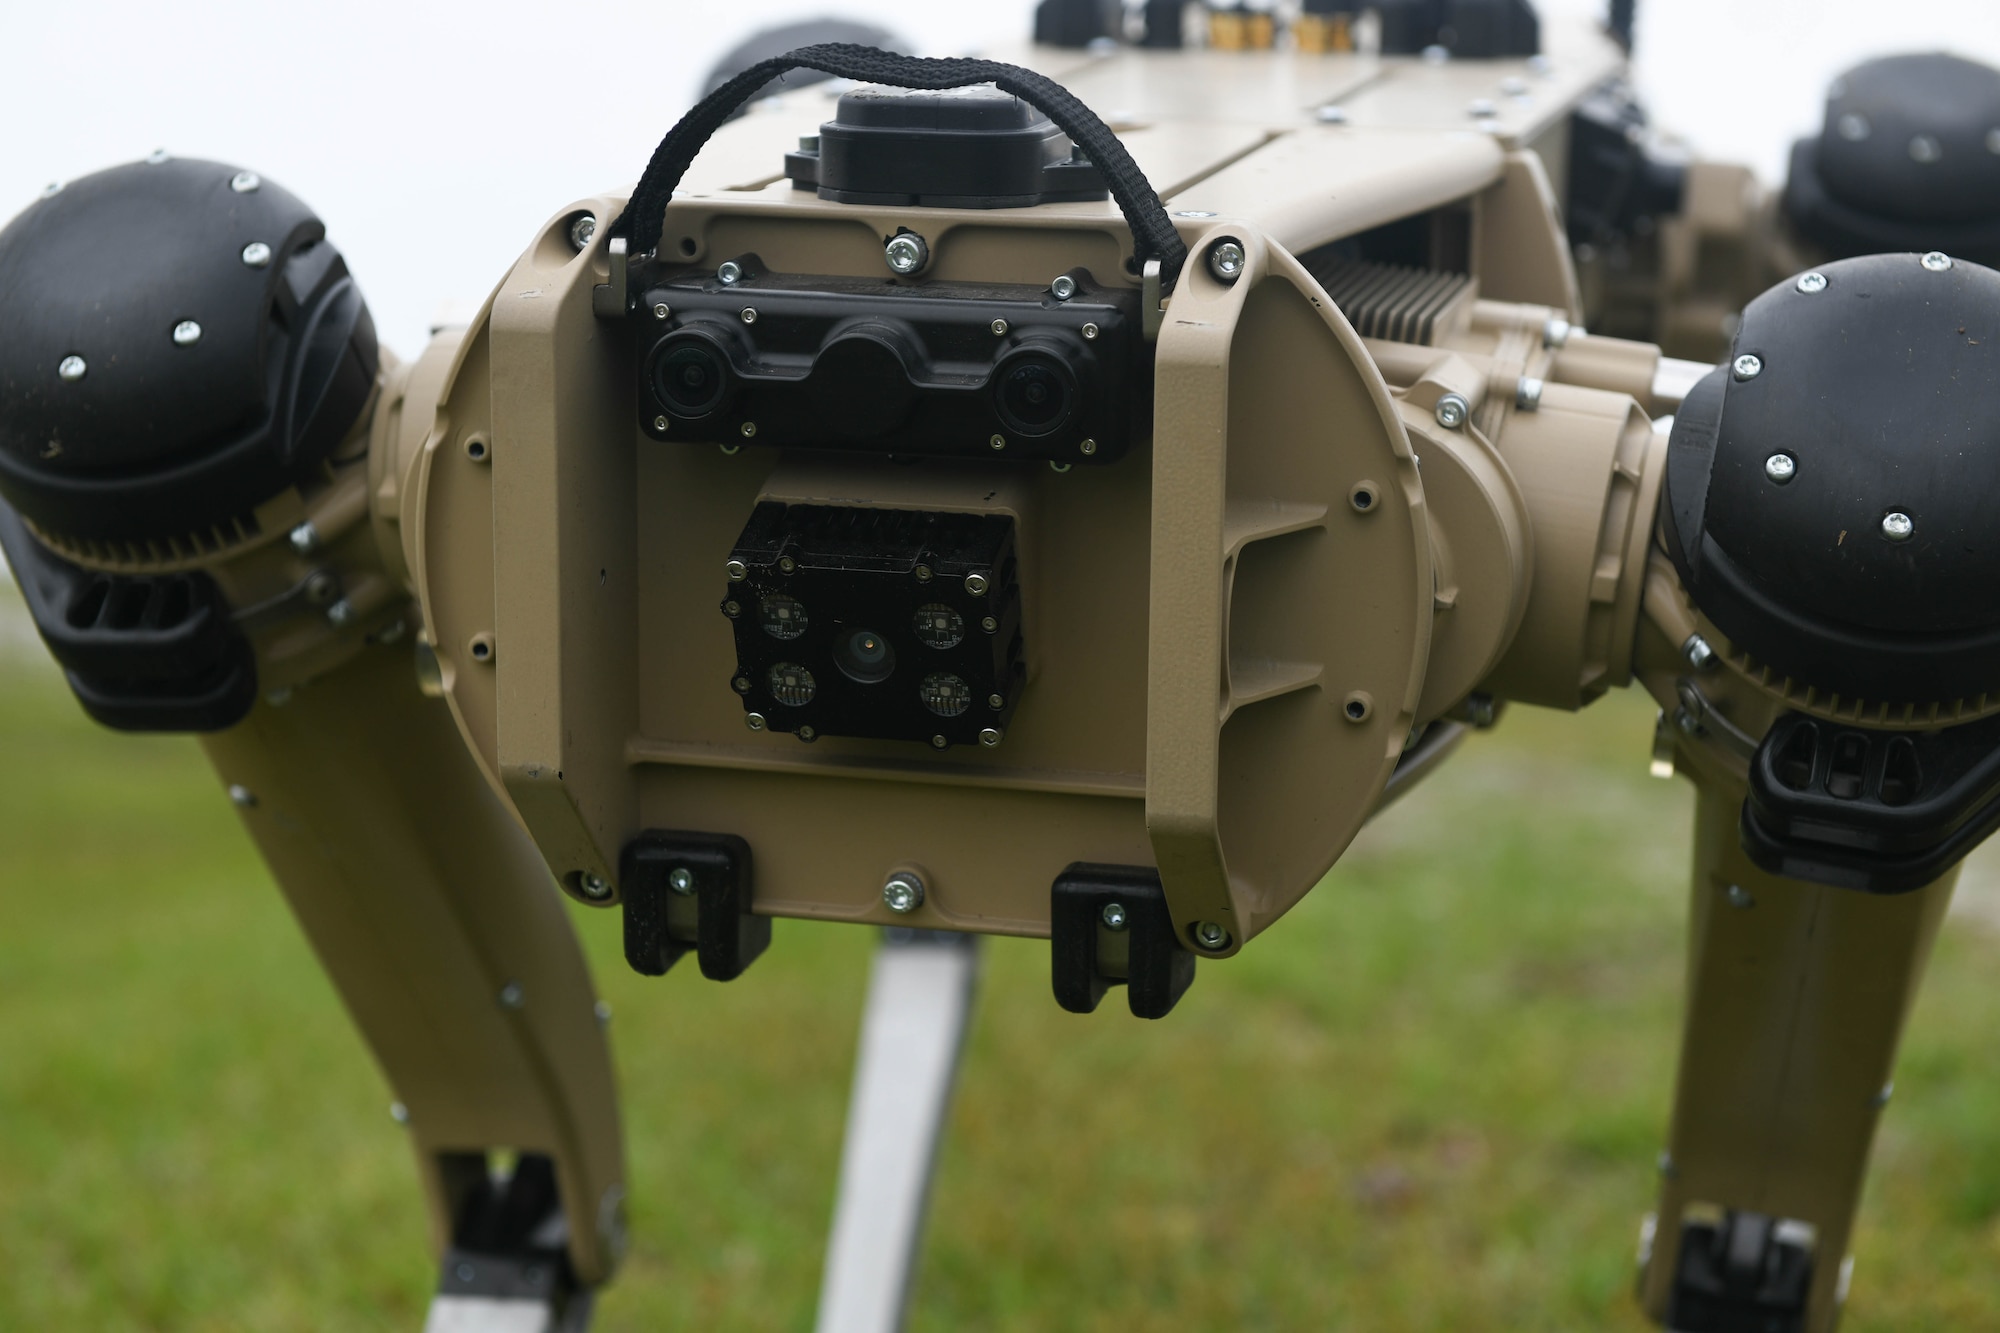 Pictured is a robot dog.